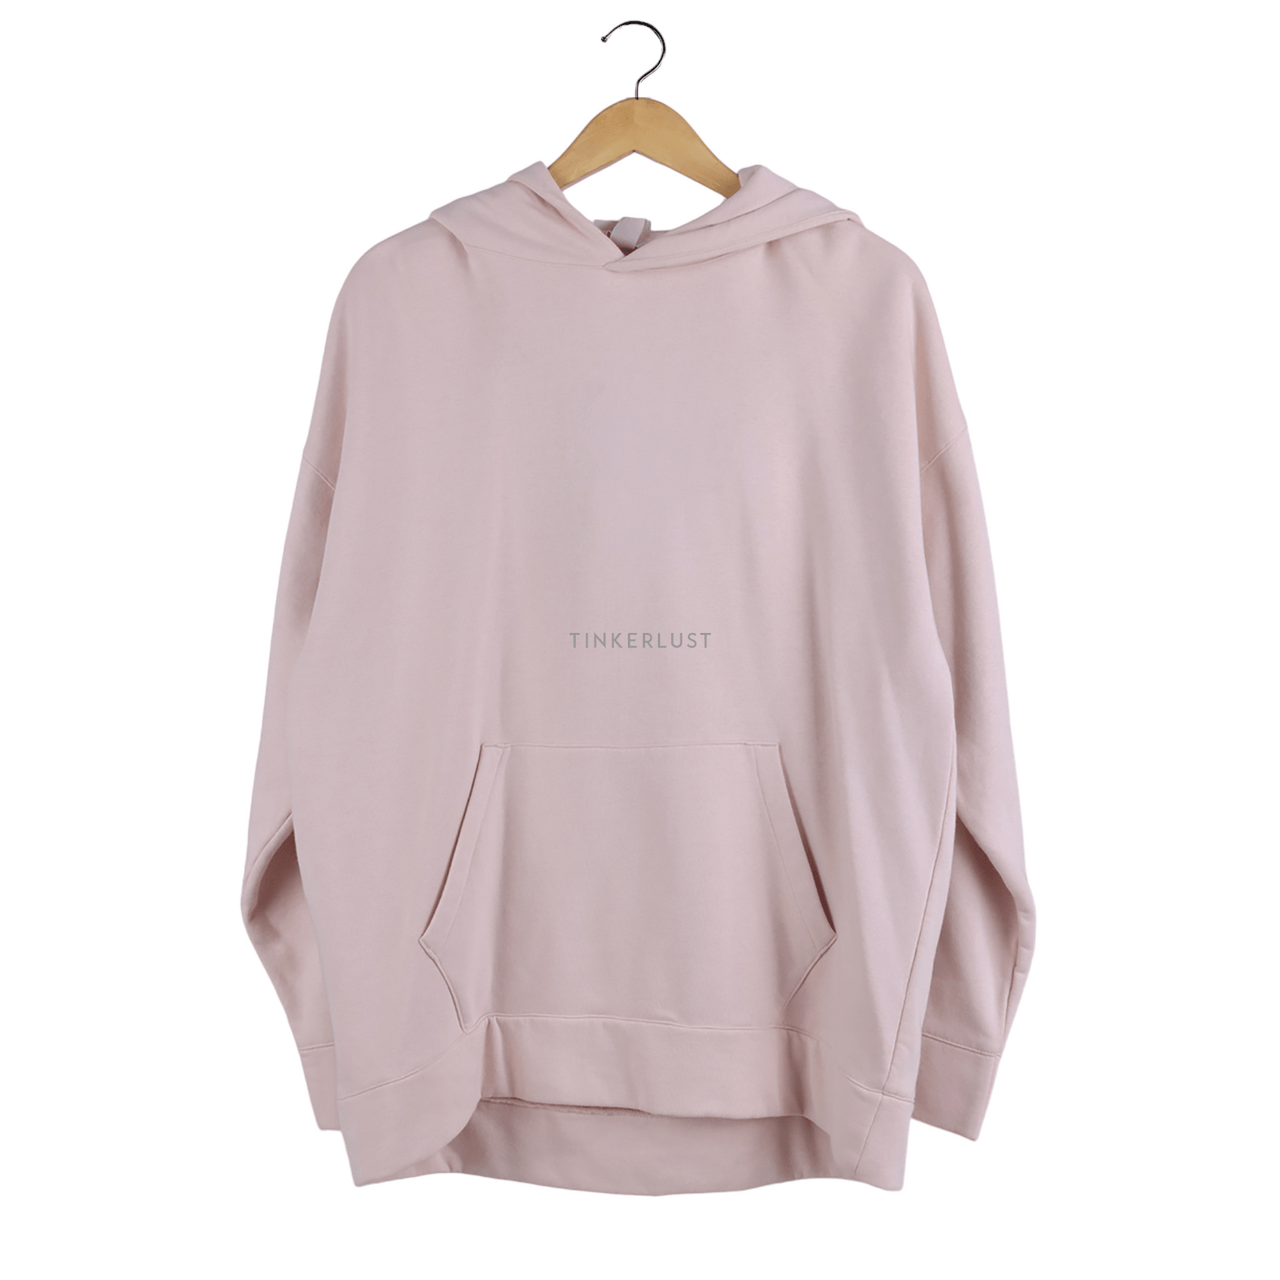 H&M Soft Pink Sweater with Hoodie